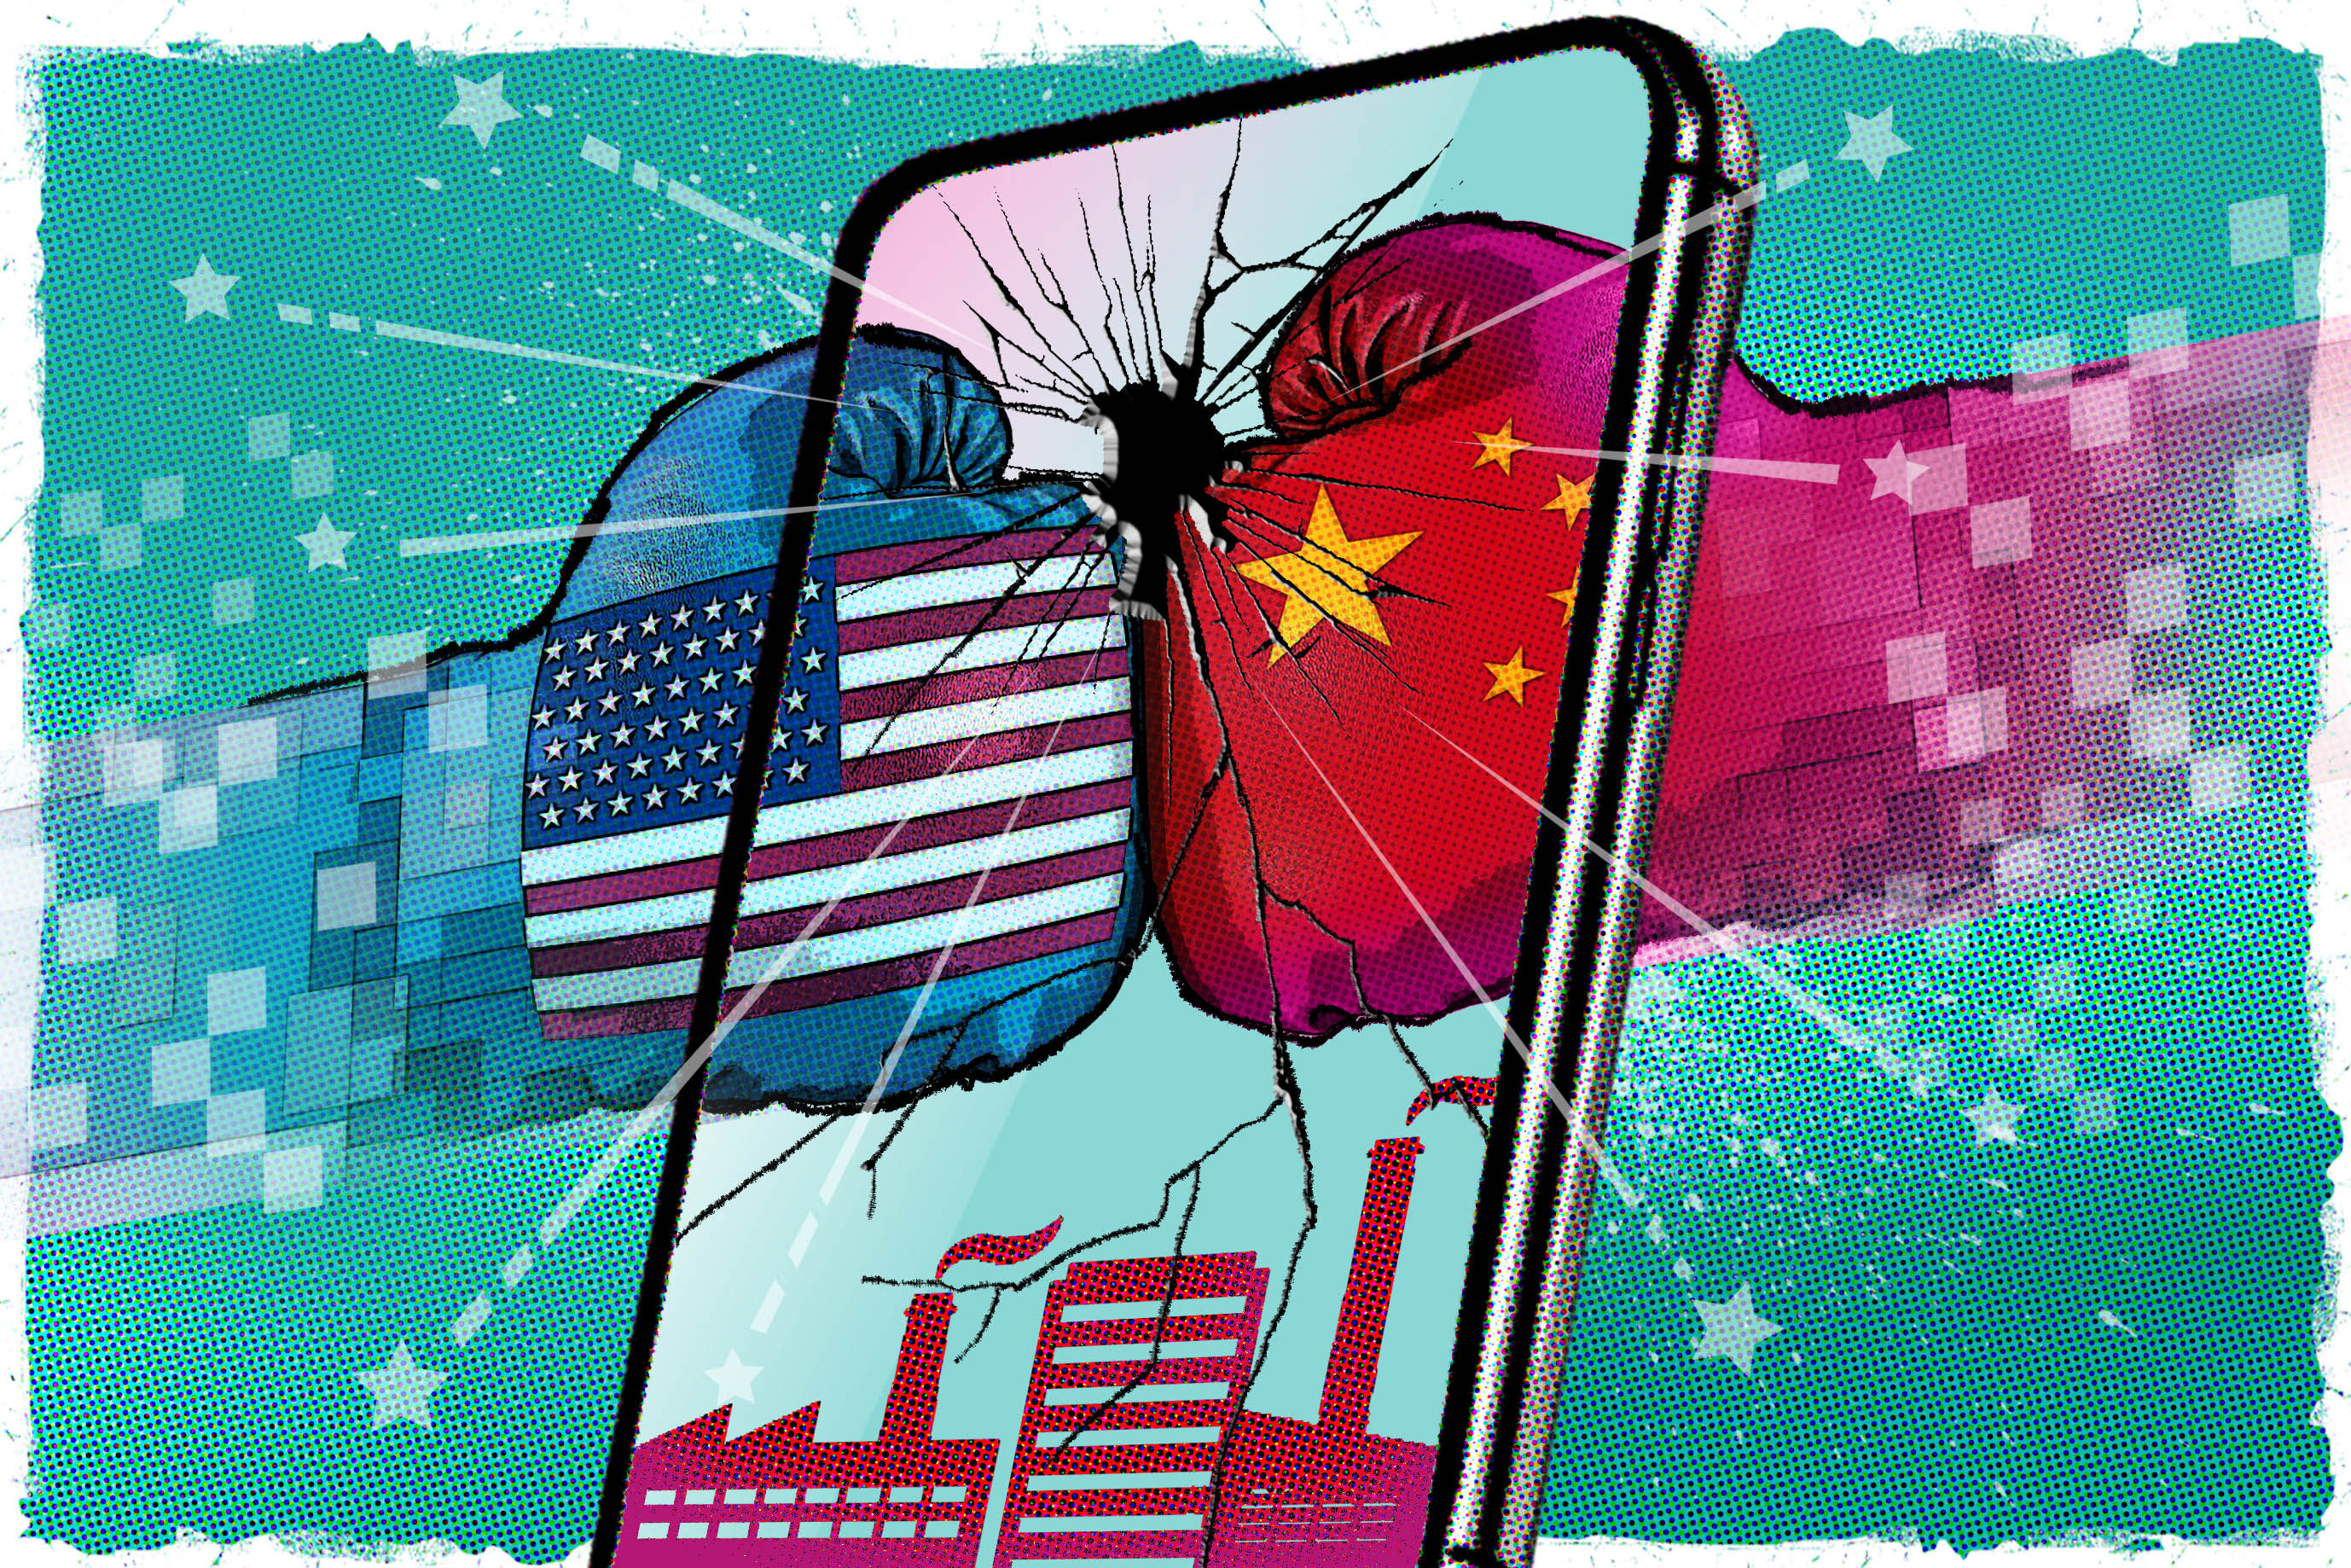 China’s mobile phone industry is caught in the middle of a tech war that has seen the US and its allies ban exports of semiconductors used to power advanced smartphones. Illustration: Henry Wong